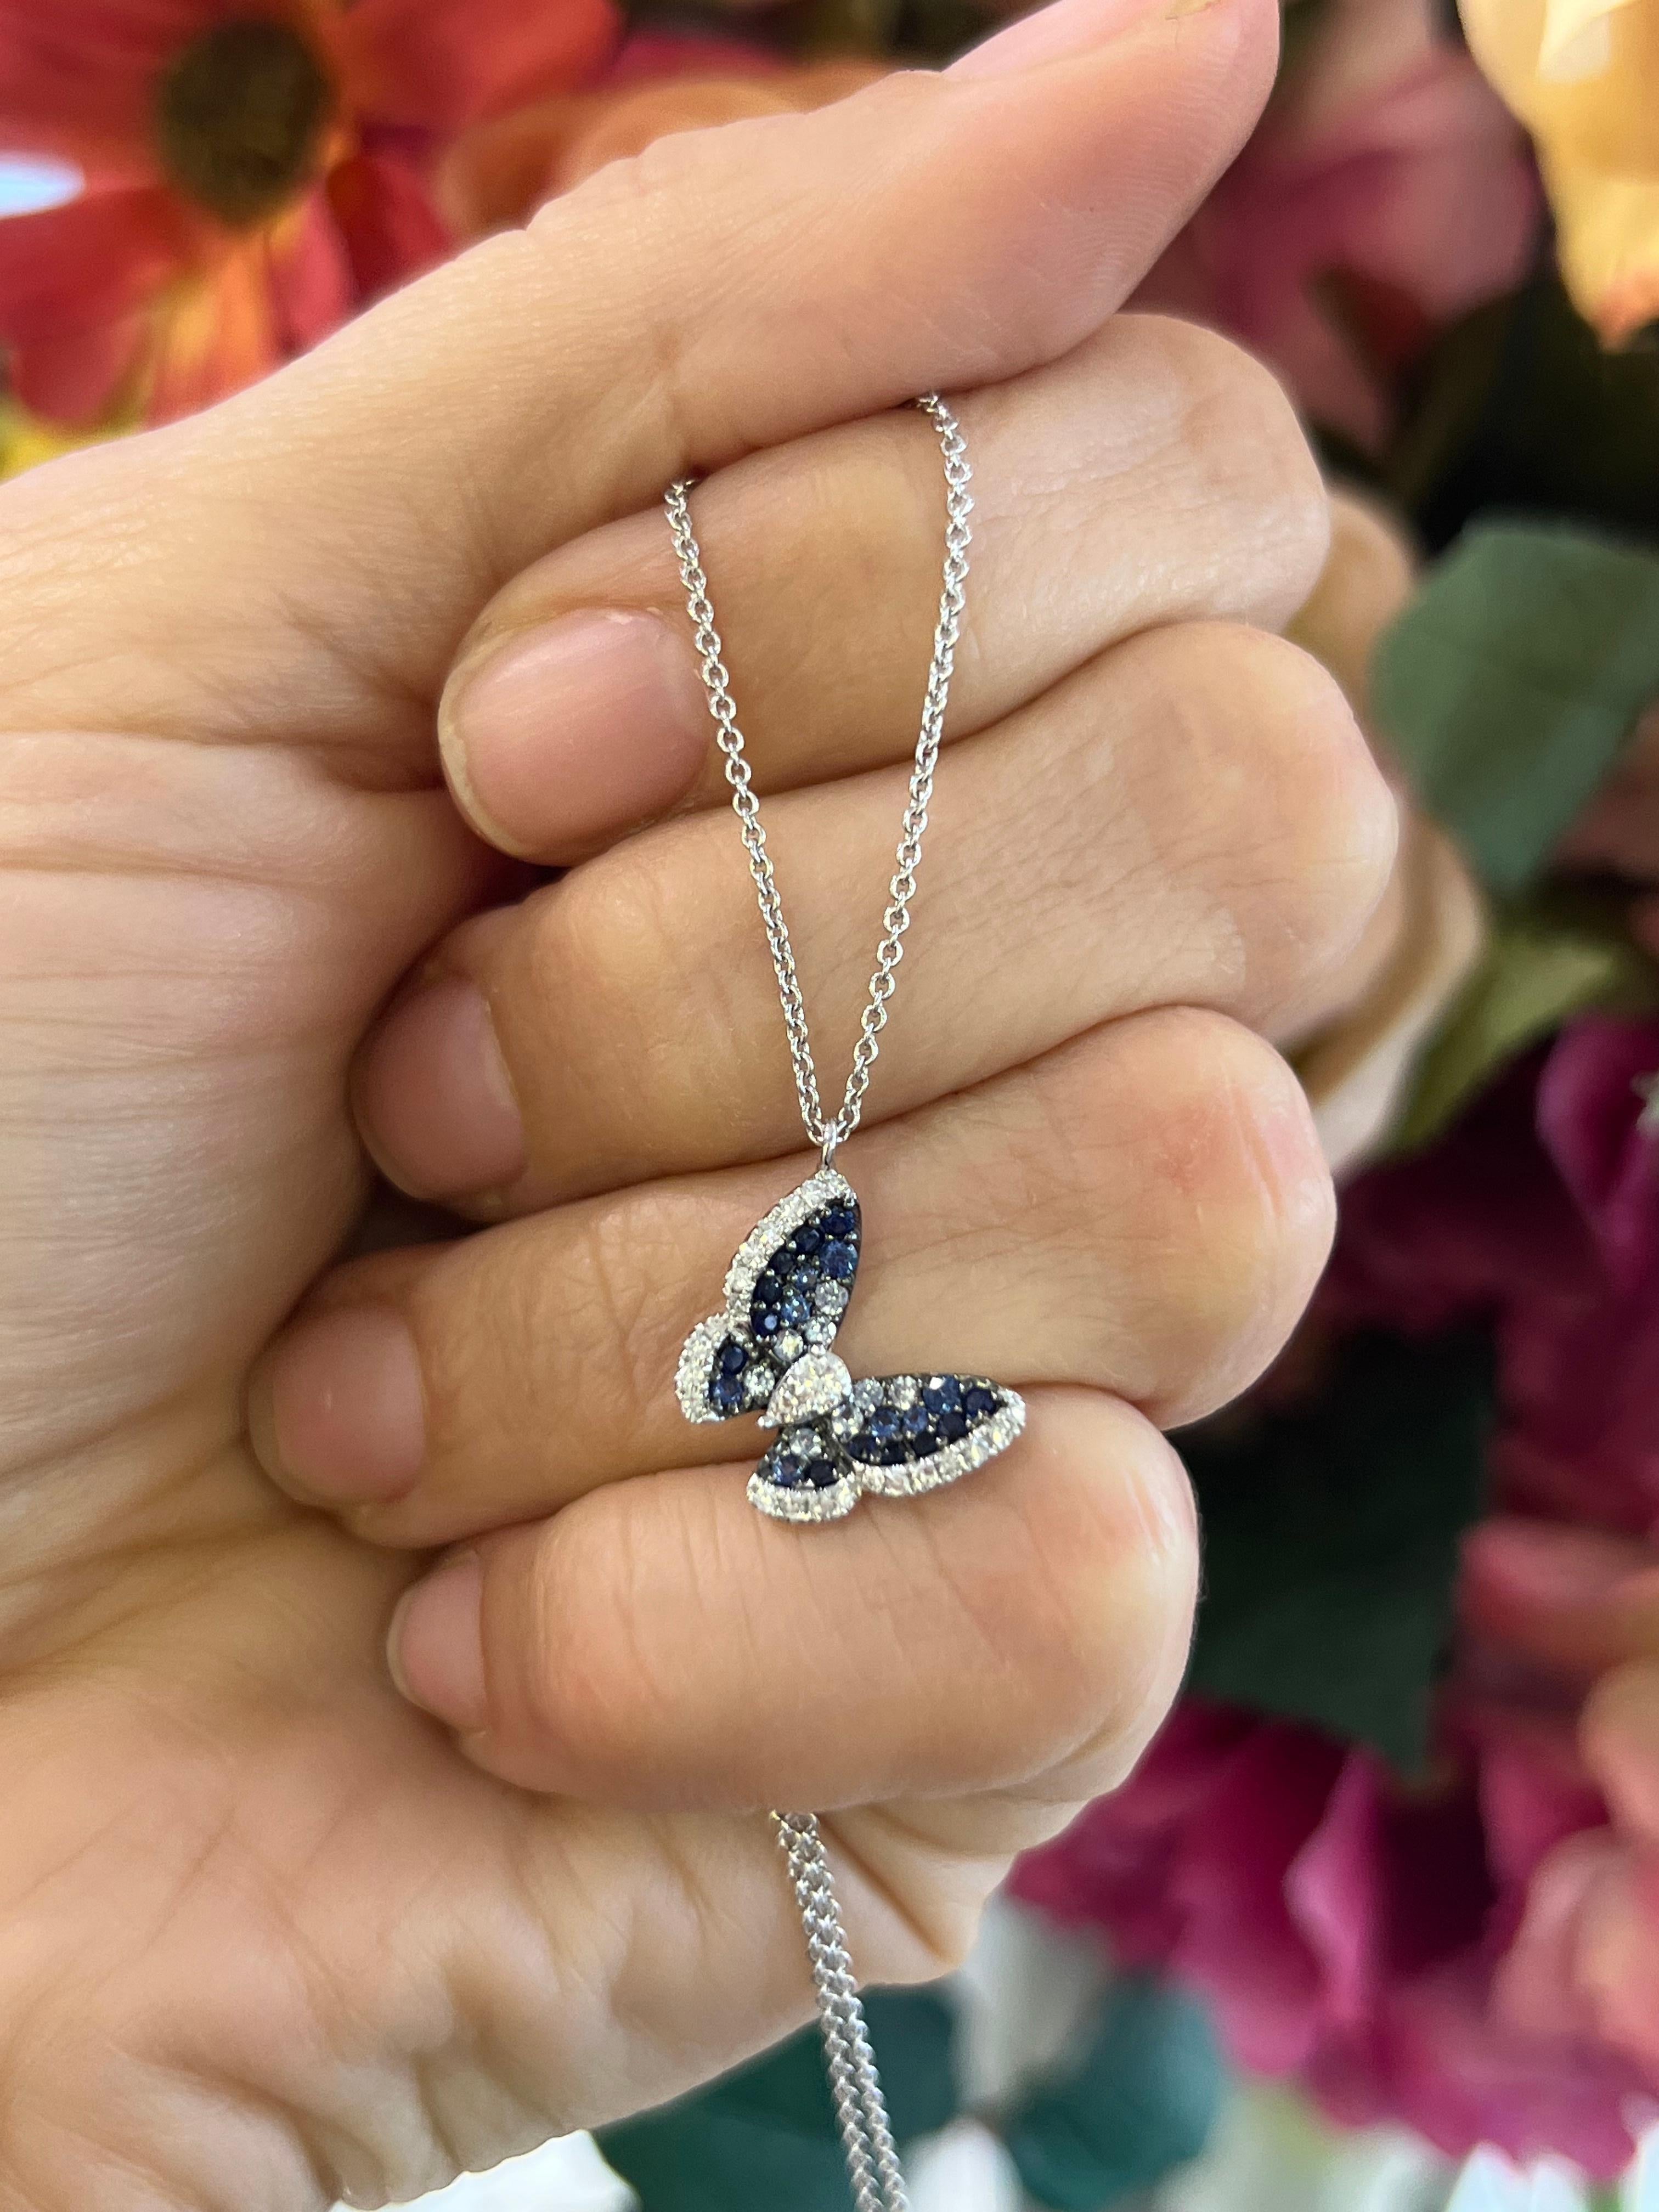 14K white gold sapphire and diamond butterfly pendant necklace.

This elegant pendant necklace features a unique butterfly shape and a stunning ombre effect of sapphires ranging from dark to lighter blue. Crafted with genuine sapphires, this